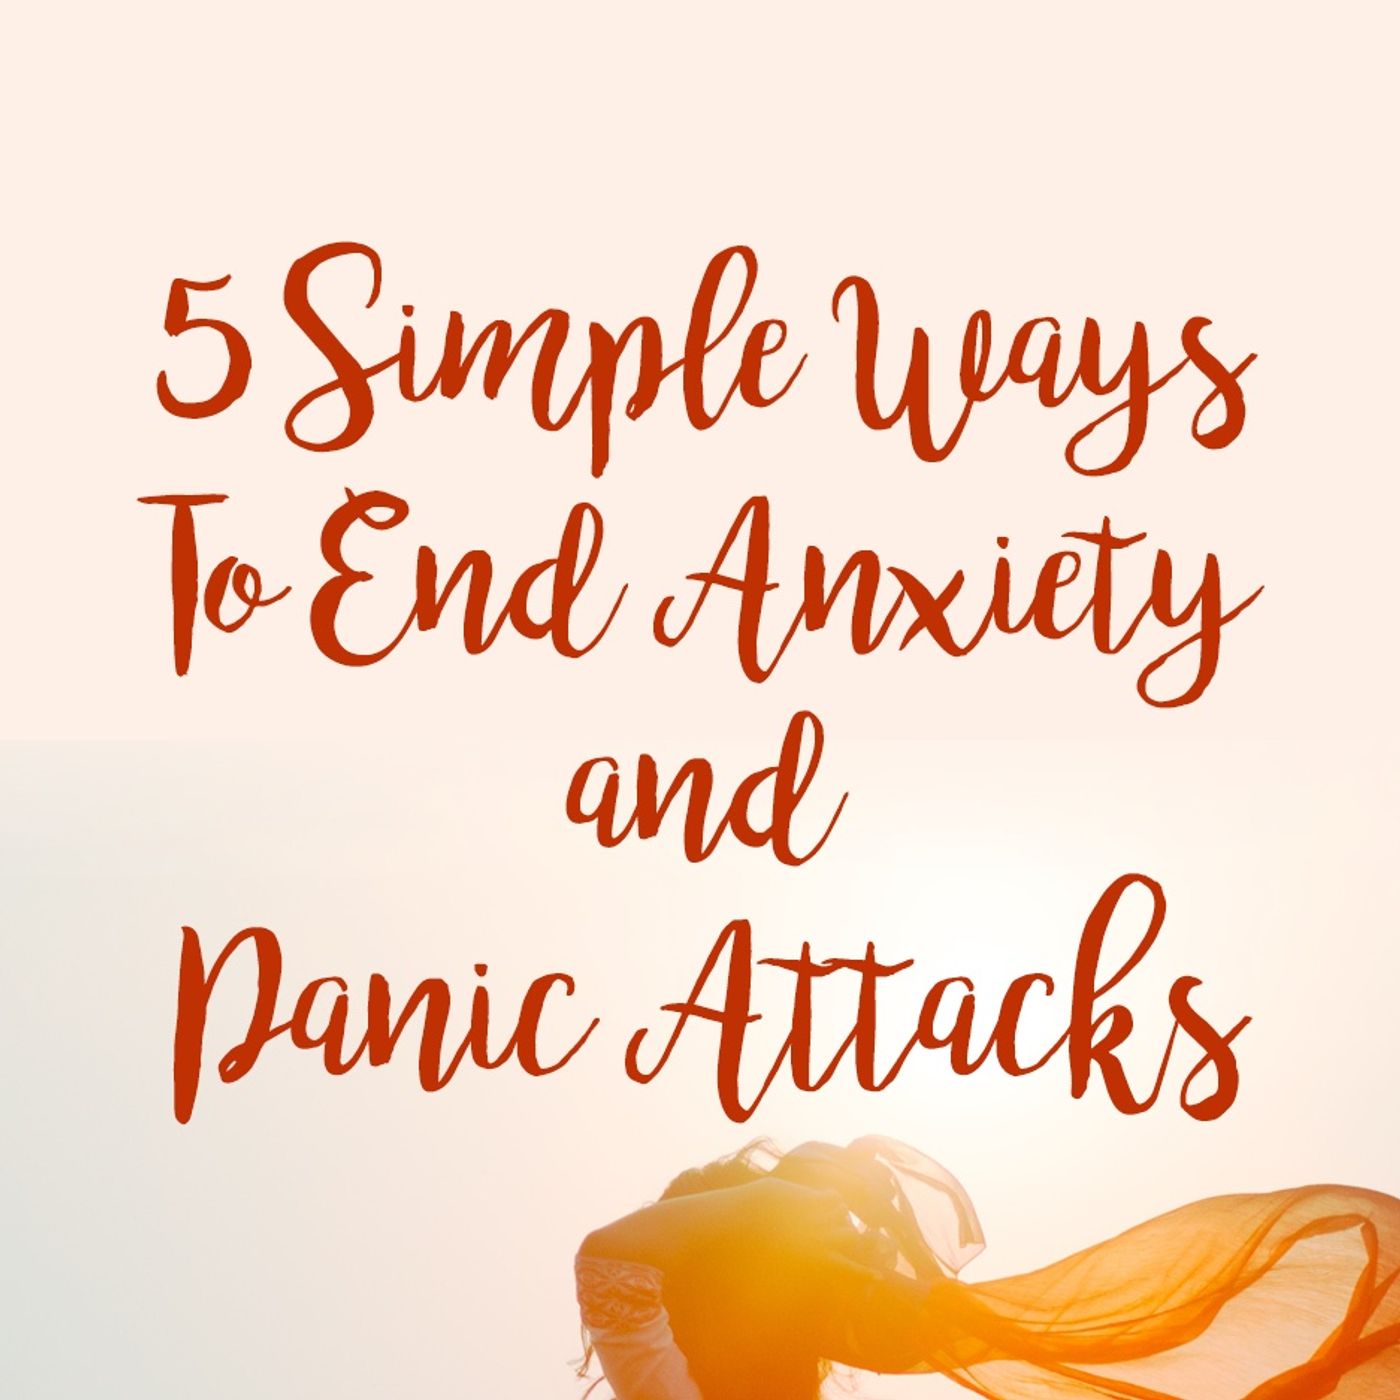 This is how to put an end to anxiety attacks